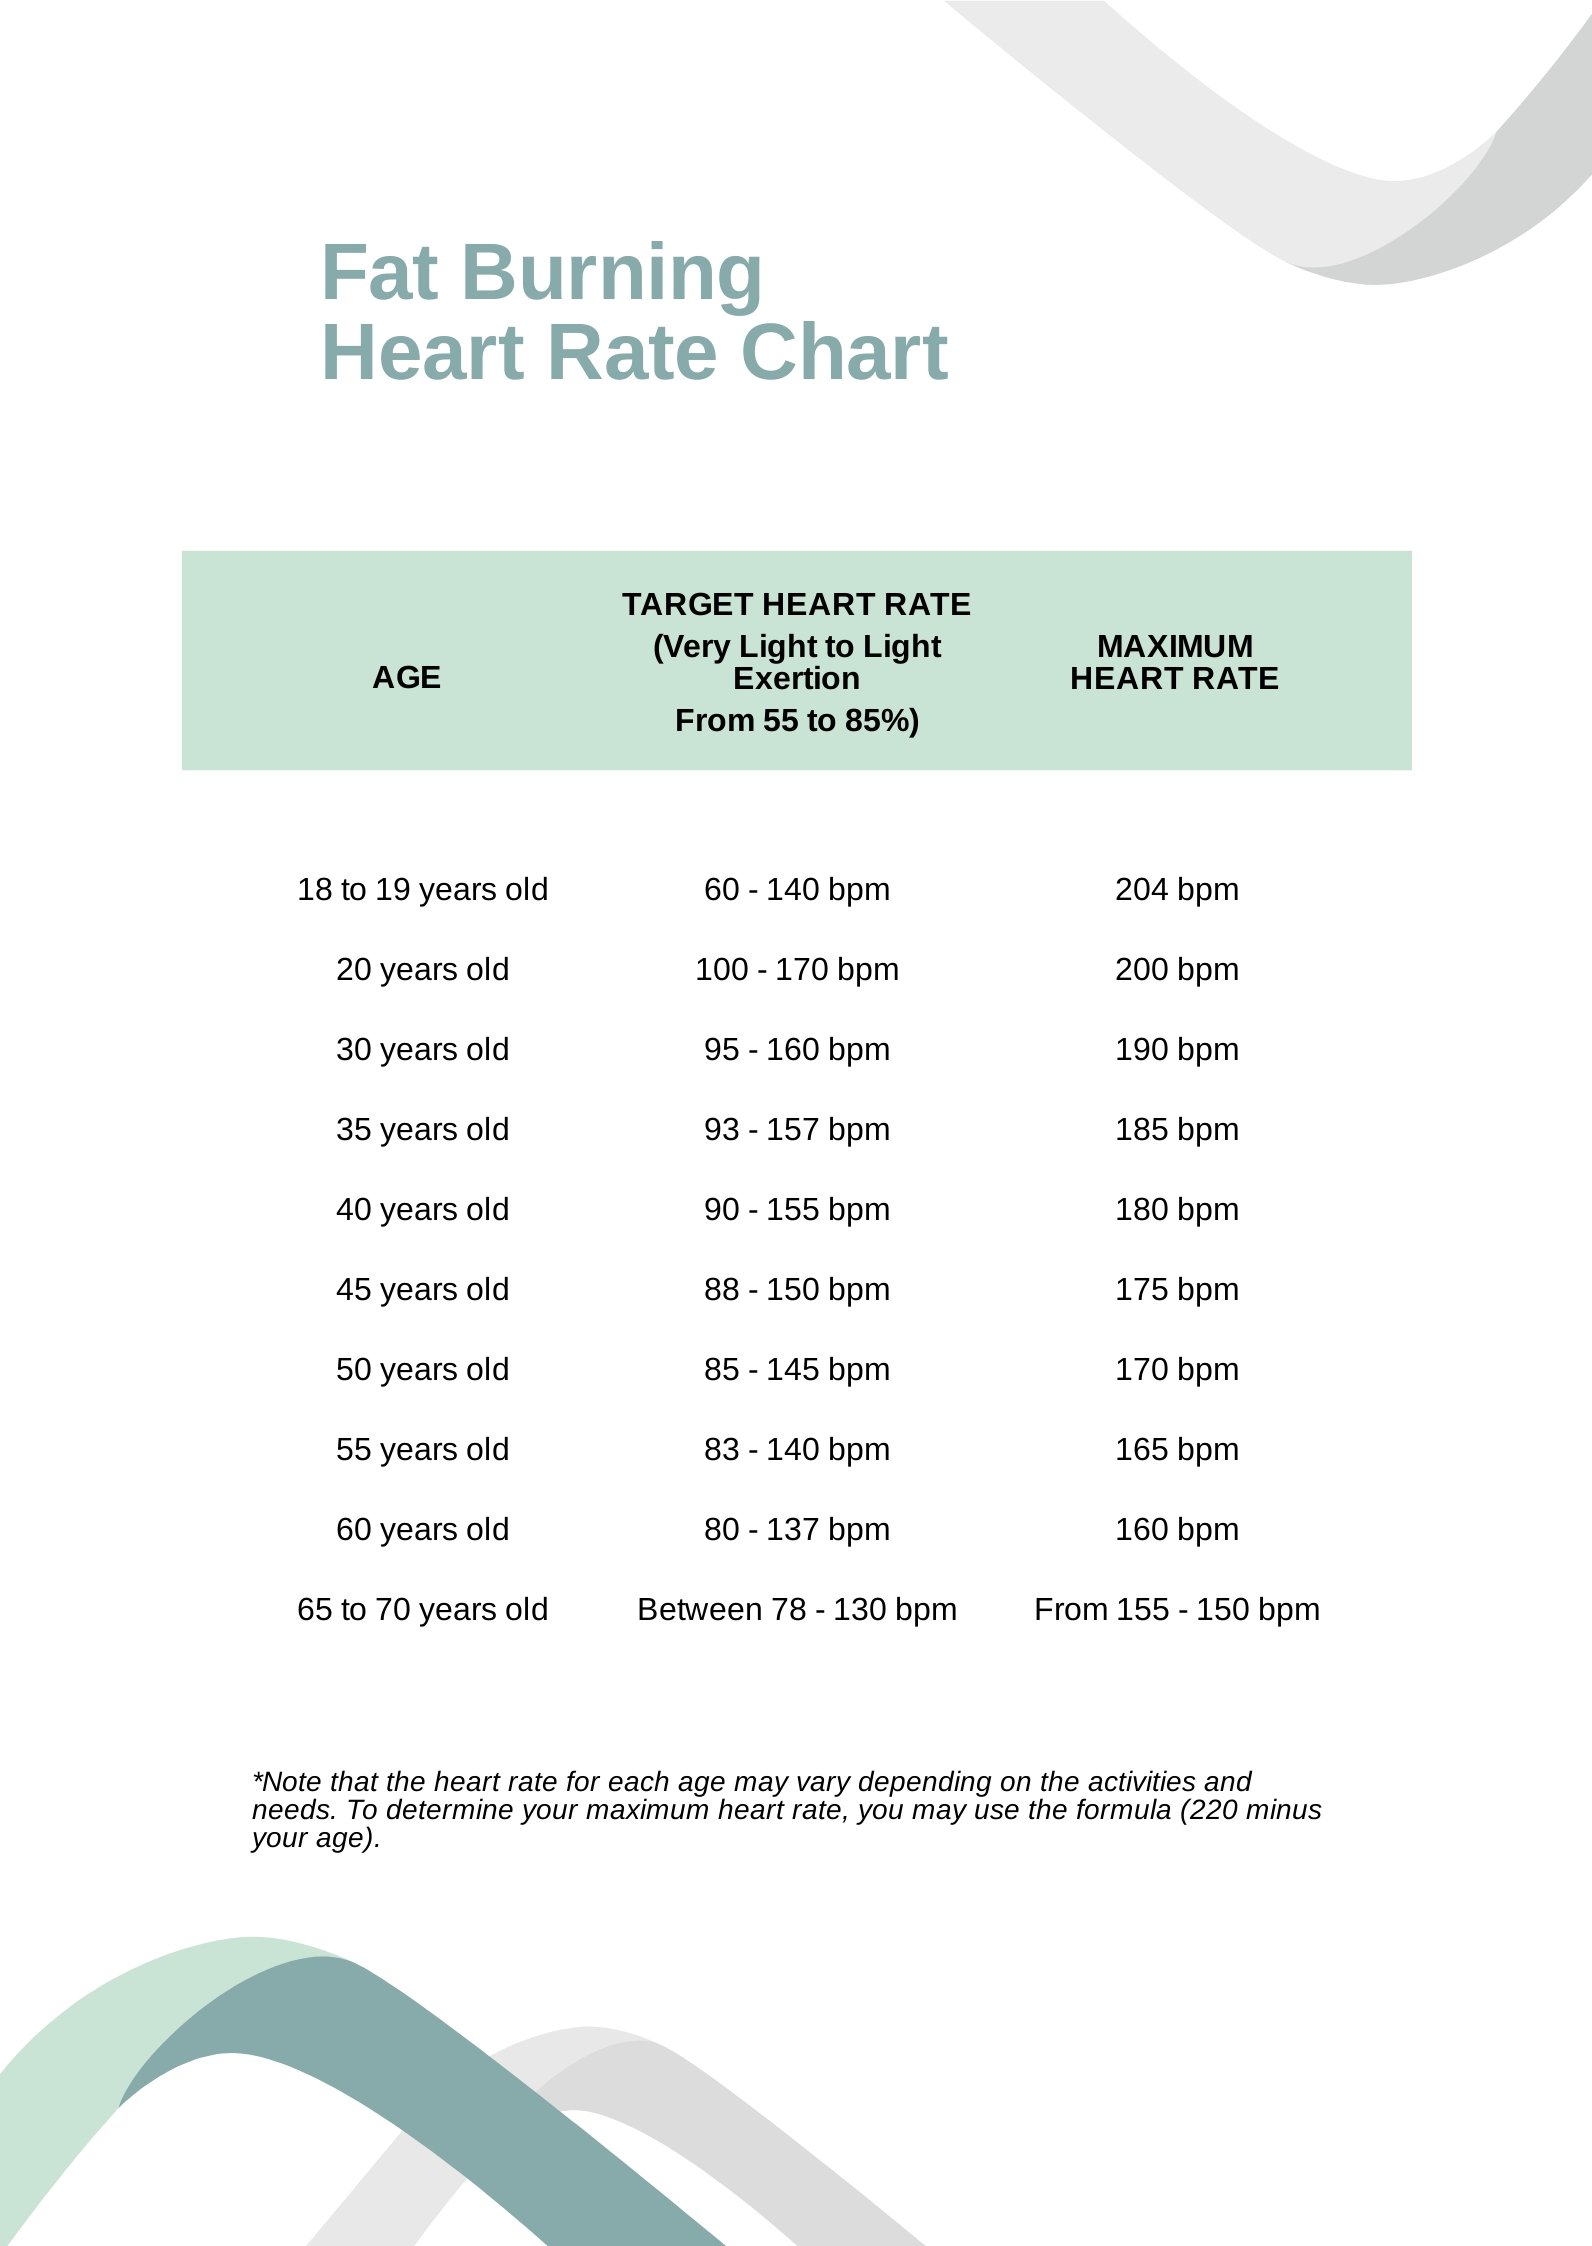 Fat Burning Heart Rate Chart in PDF